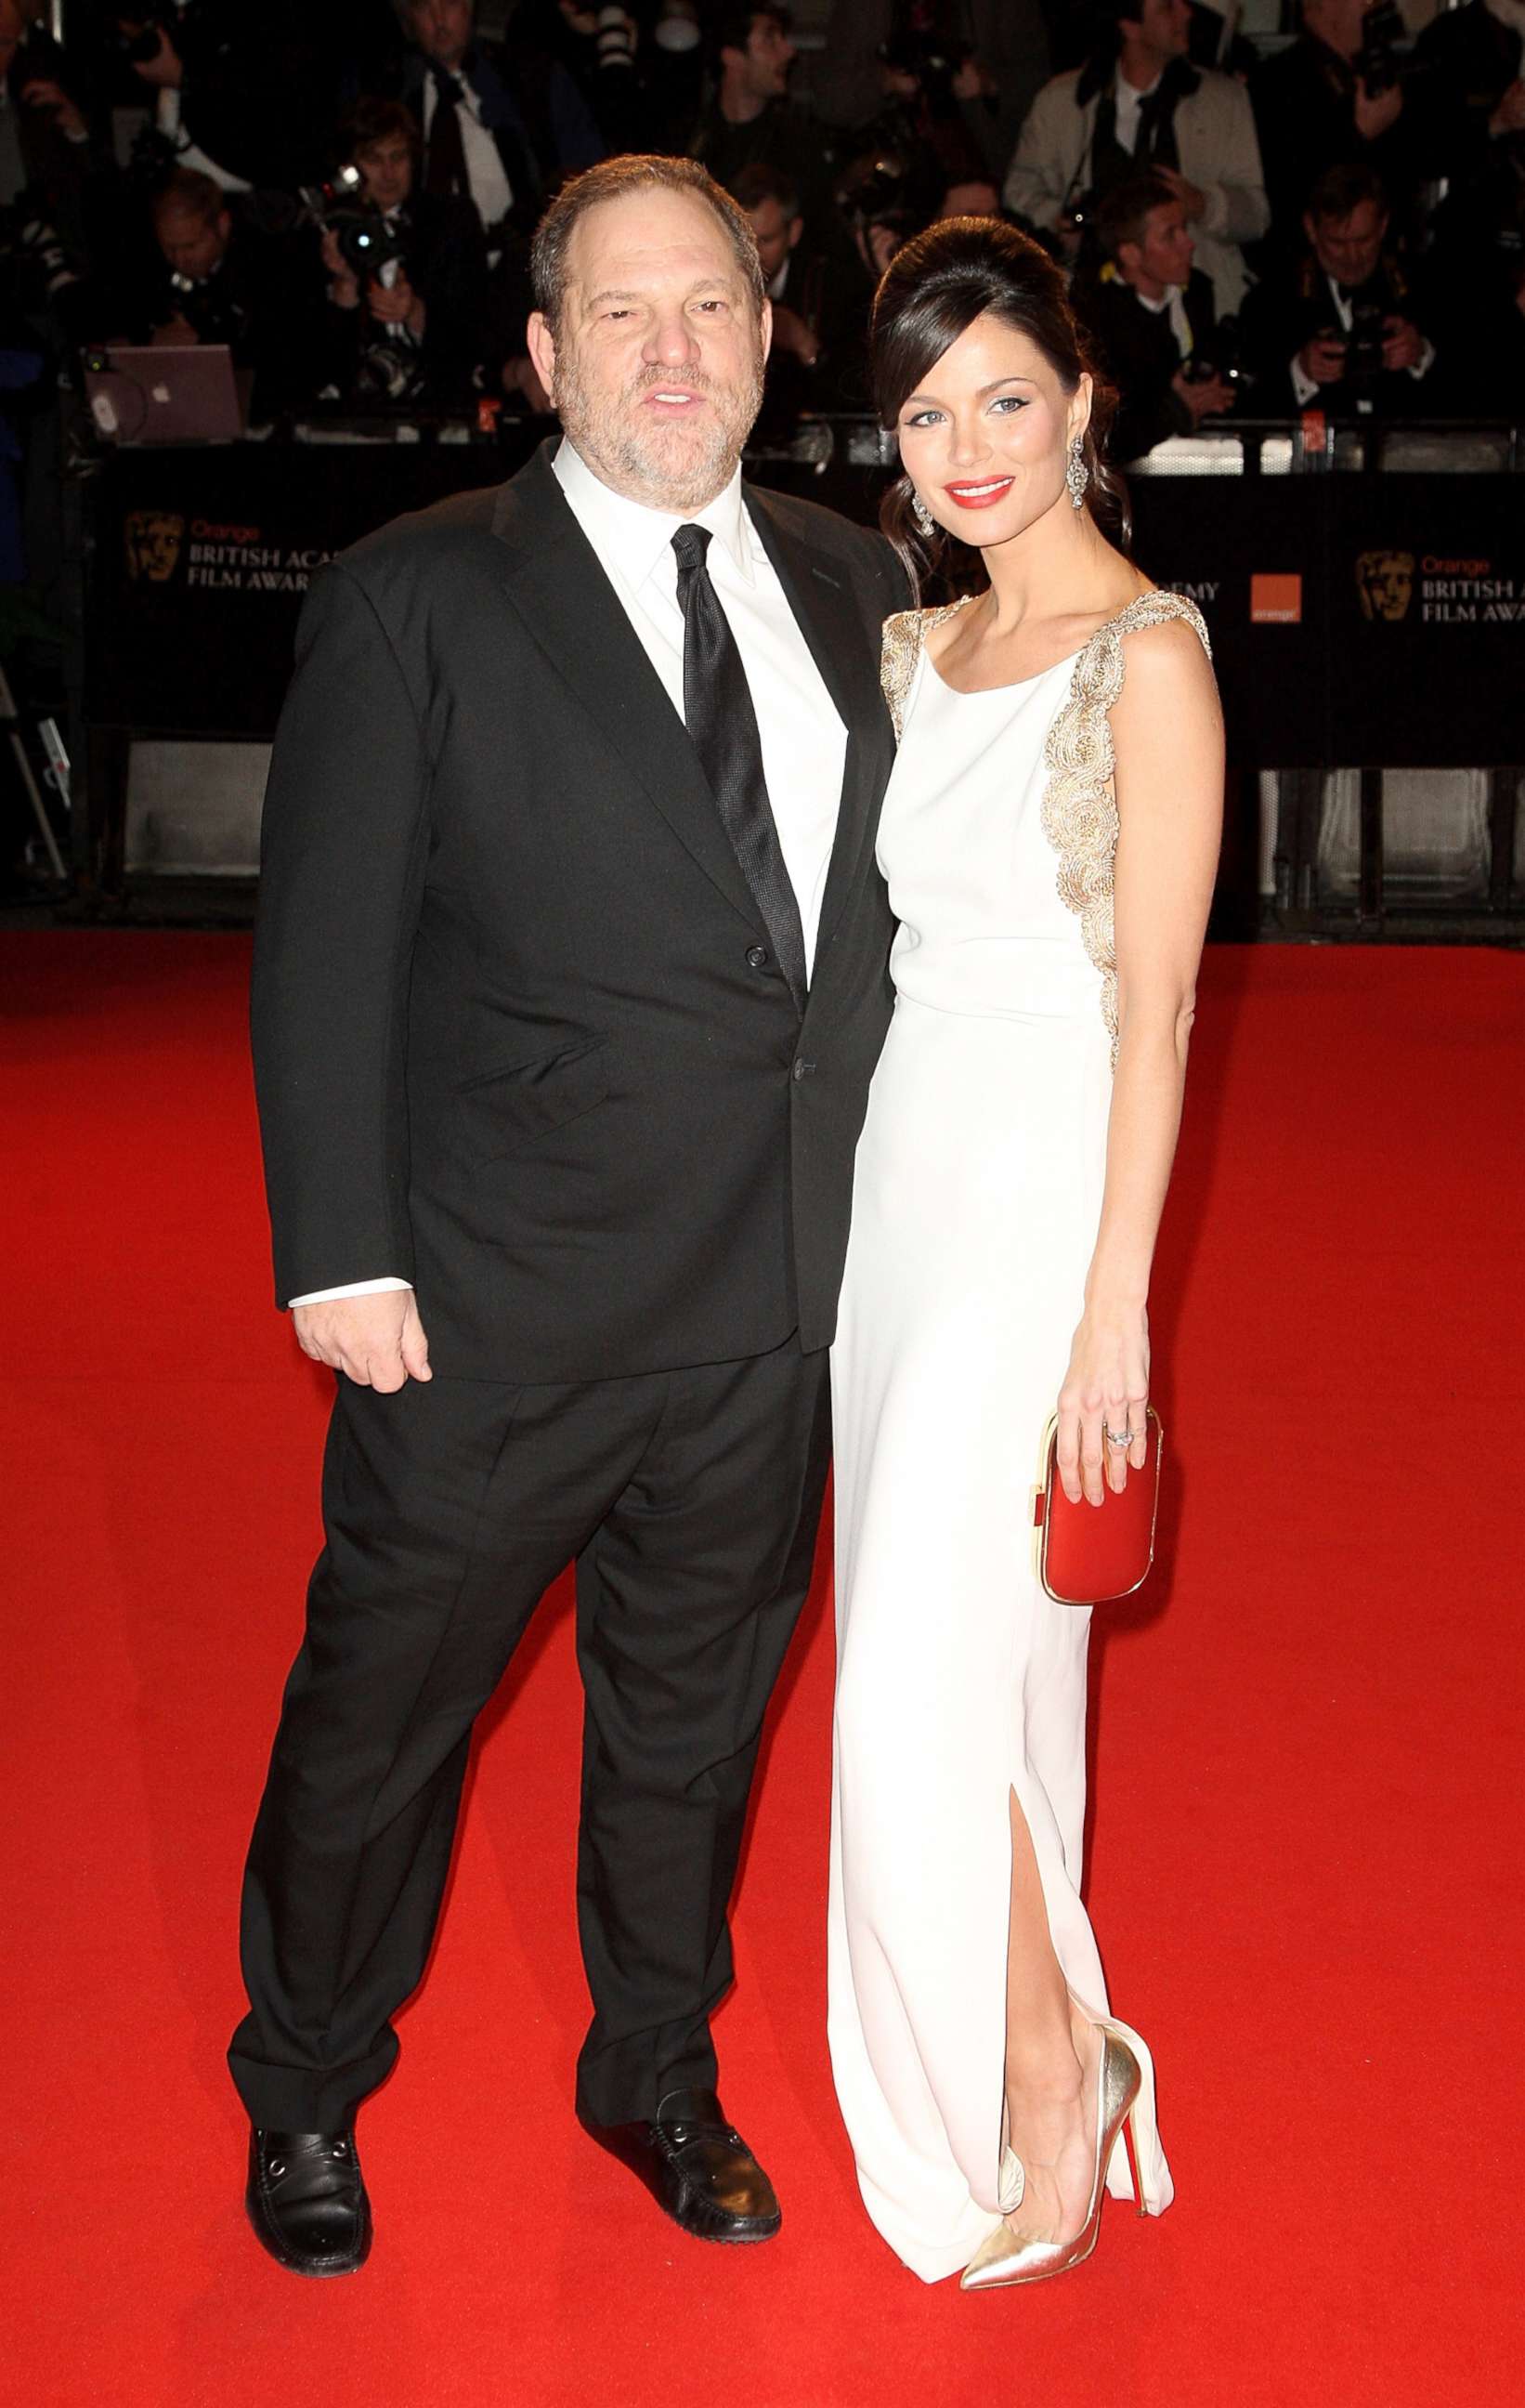 PHOTO: Film executive Harvey Weinstein and his partner Georgina Chapman arrives at the British Academy Film Awards (BAFTAs) at the Royal Opera House, Feb. 10, 2008, in London.